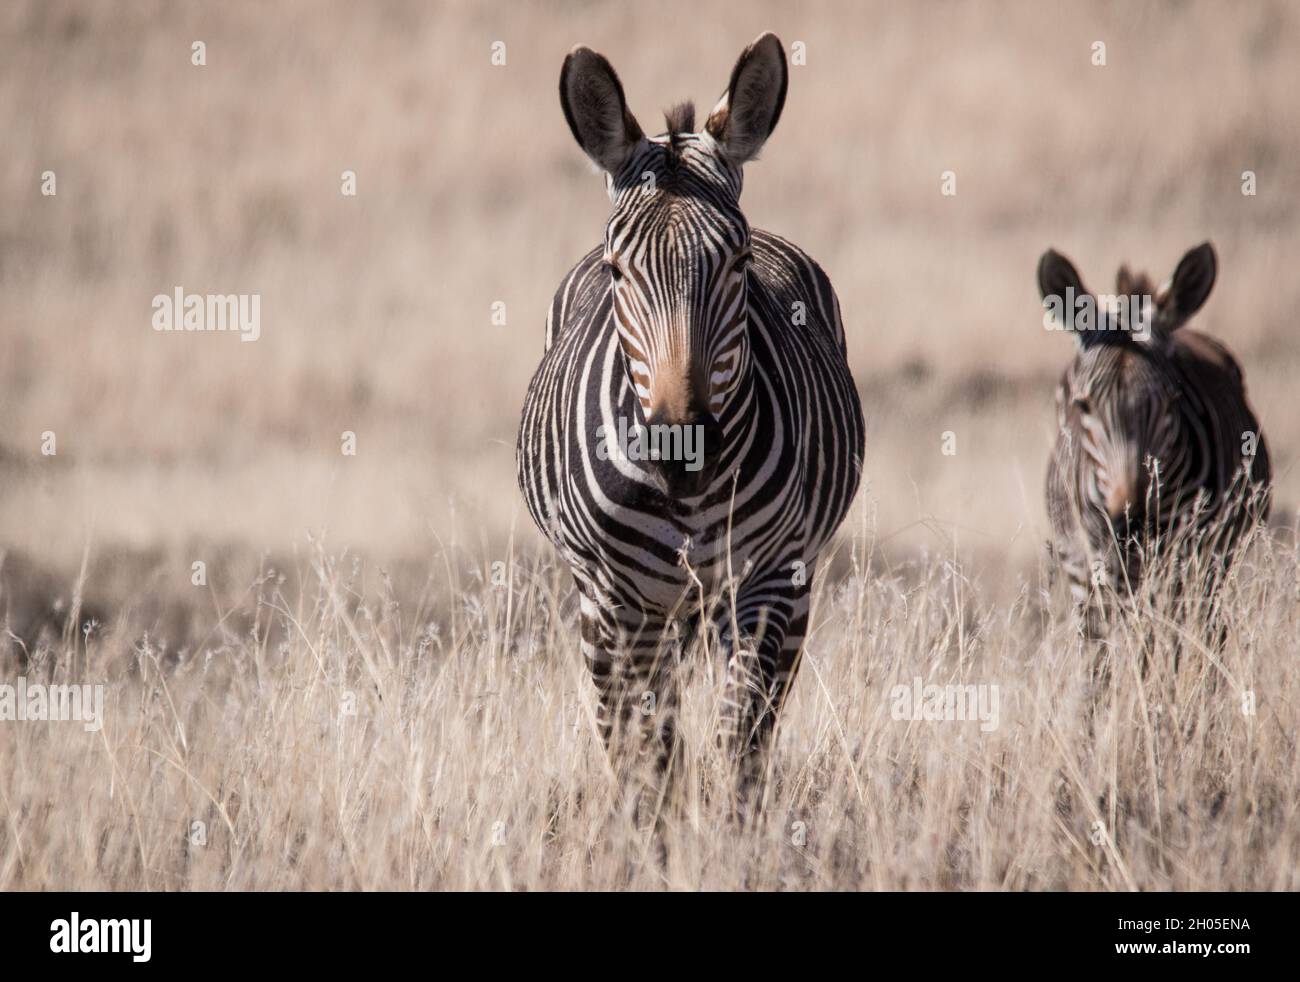 A zebra in a hot, harsh African landscape. Stock Photo